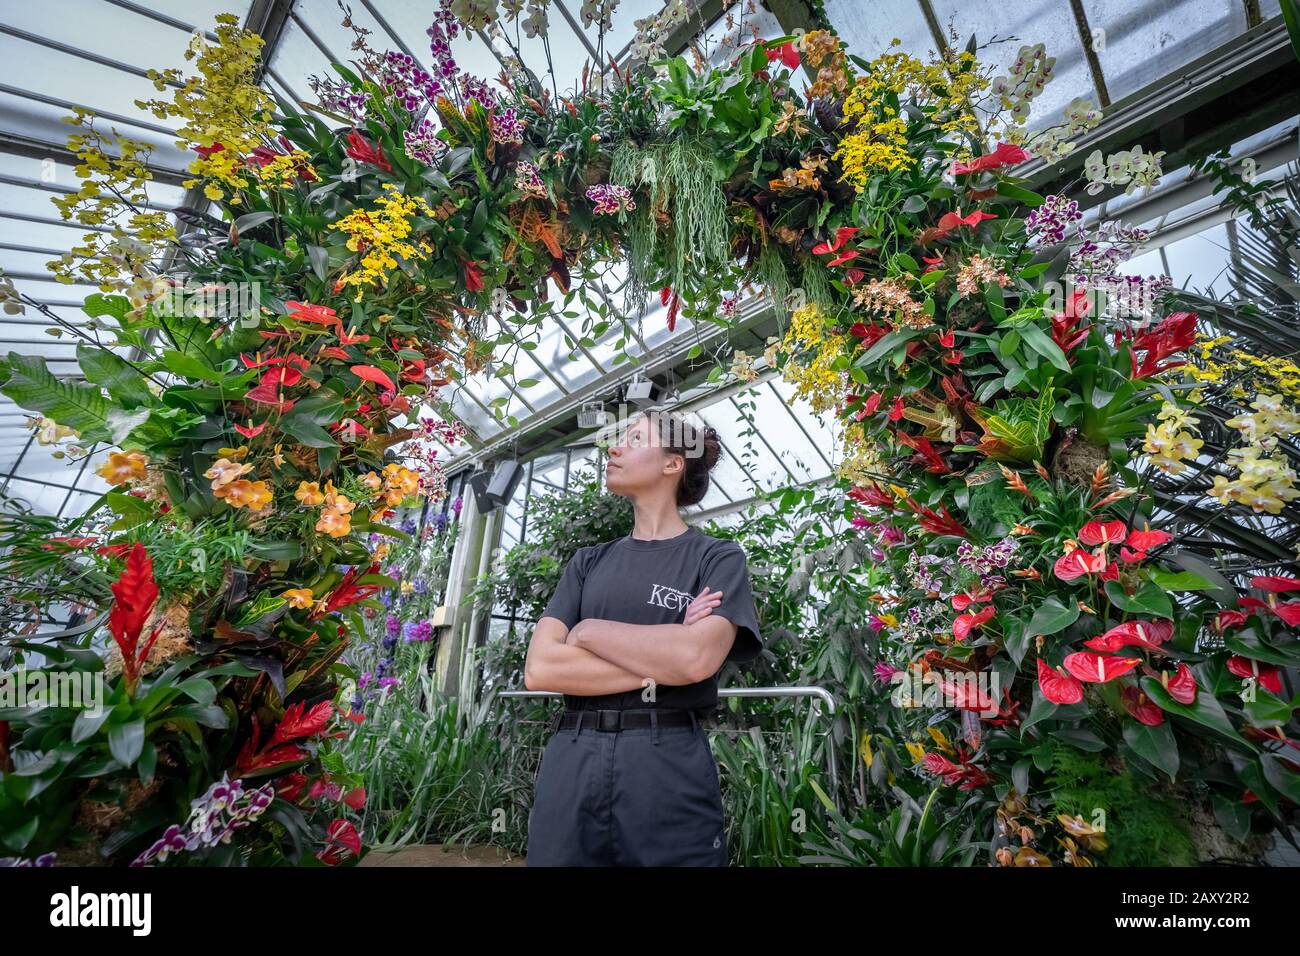 Kew Orchid Festival 2020: Indonesia. Annual orchid festival themed on the country of Indonesia with over 5,000 colourful orchid and tropical plants. Stock Photo